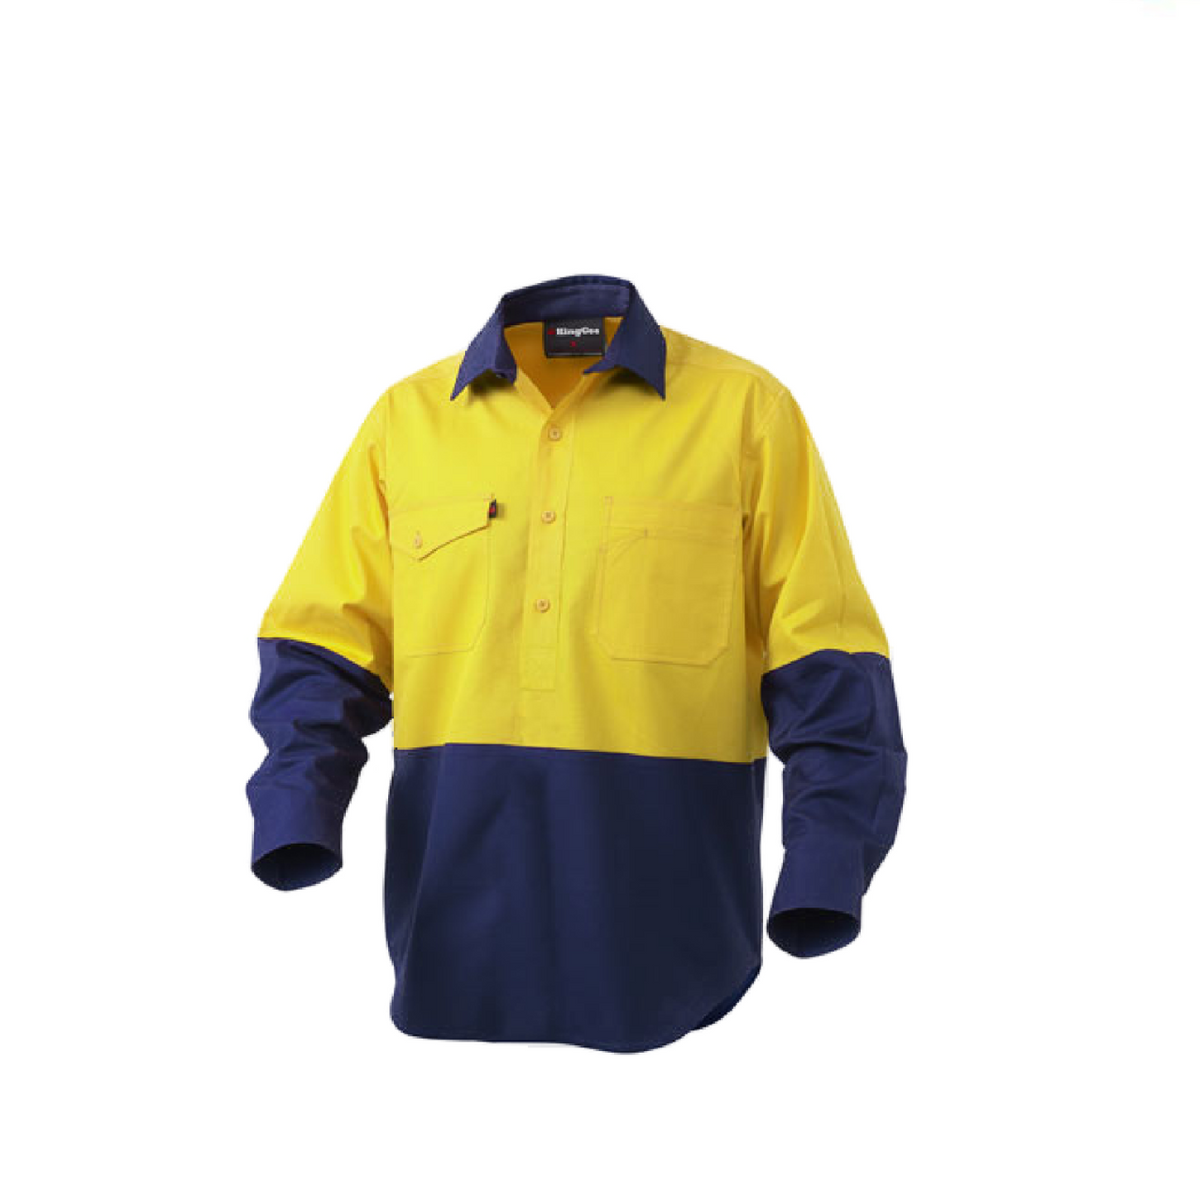 KingGee Workcool Hi-Vis Closed Front Shirt Long Sleeve Comfy Workwear K54876-Collins Clothing Co